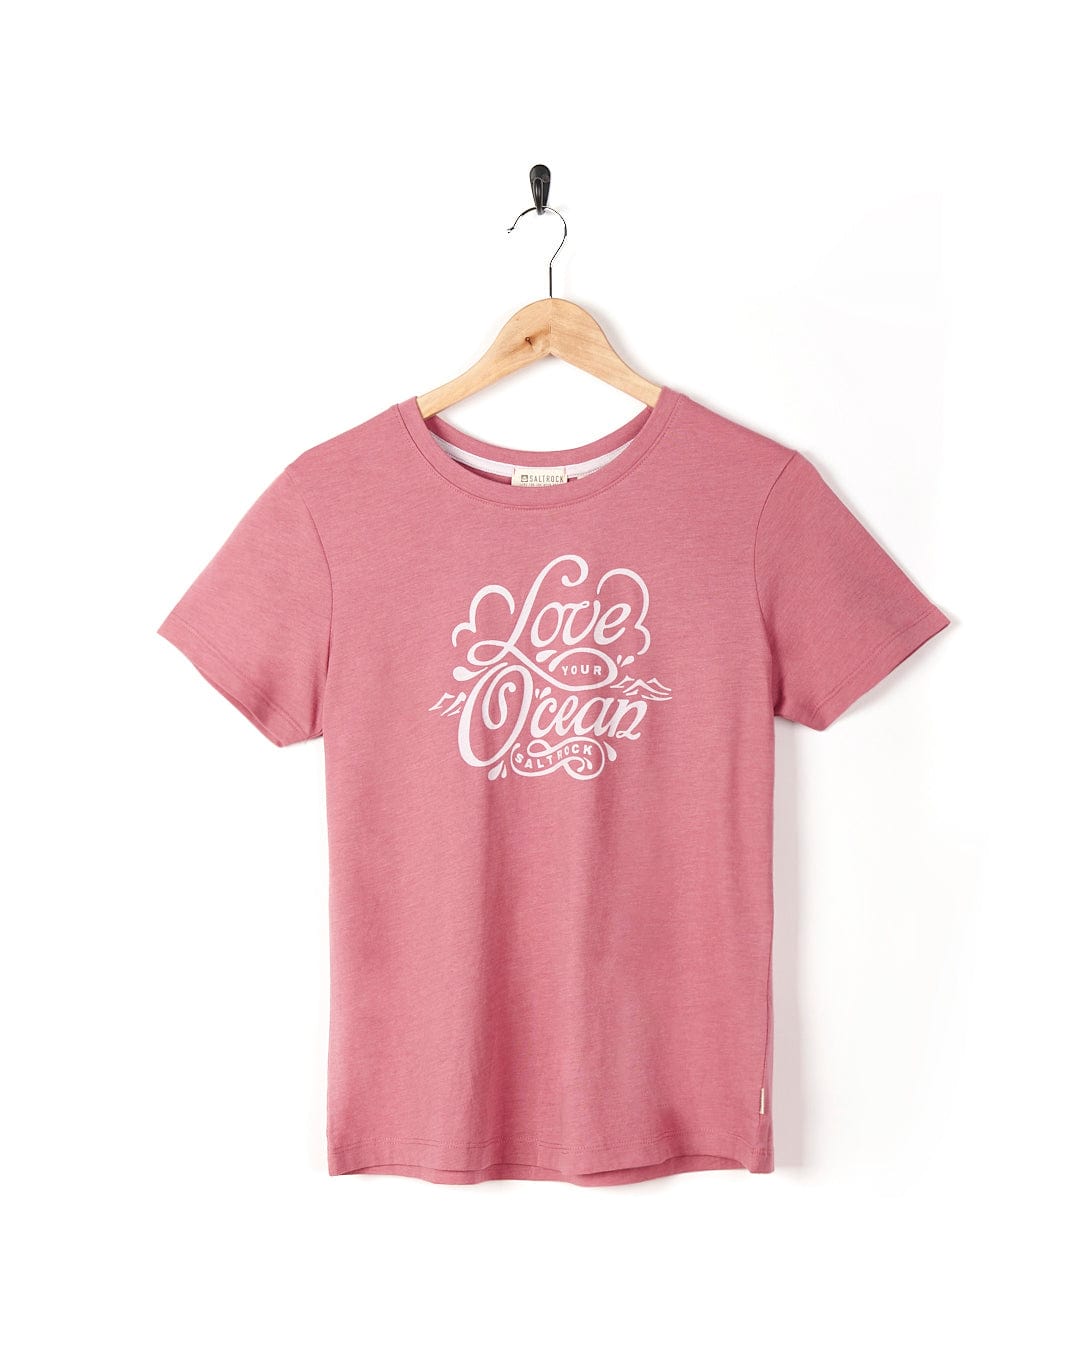 A Saltrock Love Your Ocean - Womens Short Sleeve T-Shirt - Mid Pink with the words love the ocean on it.